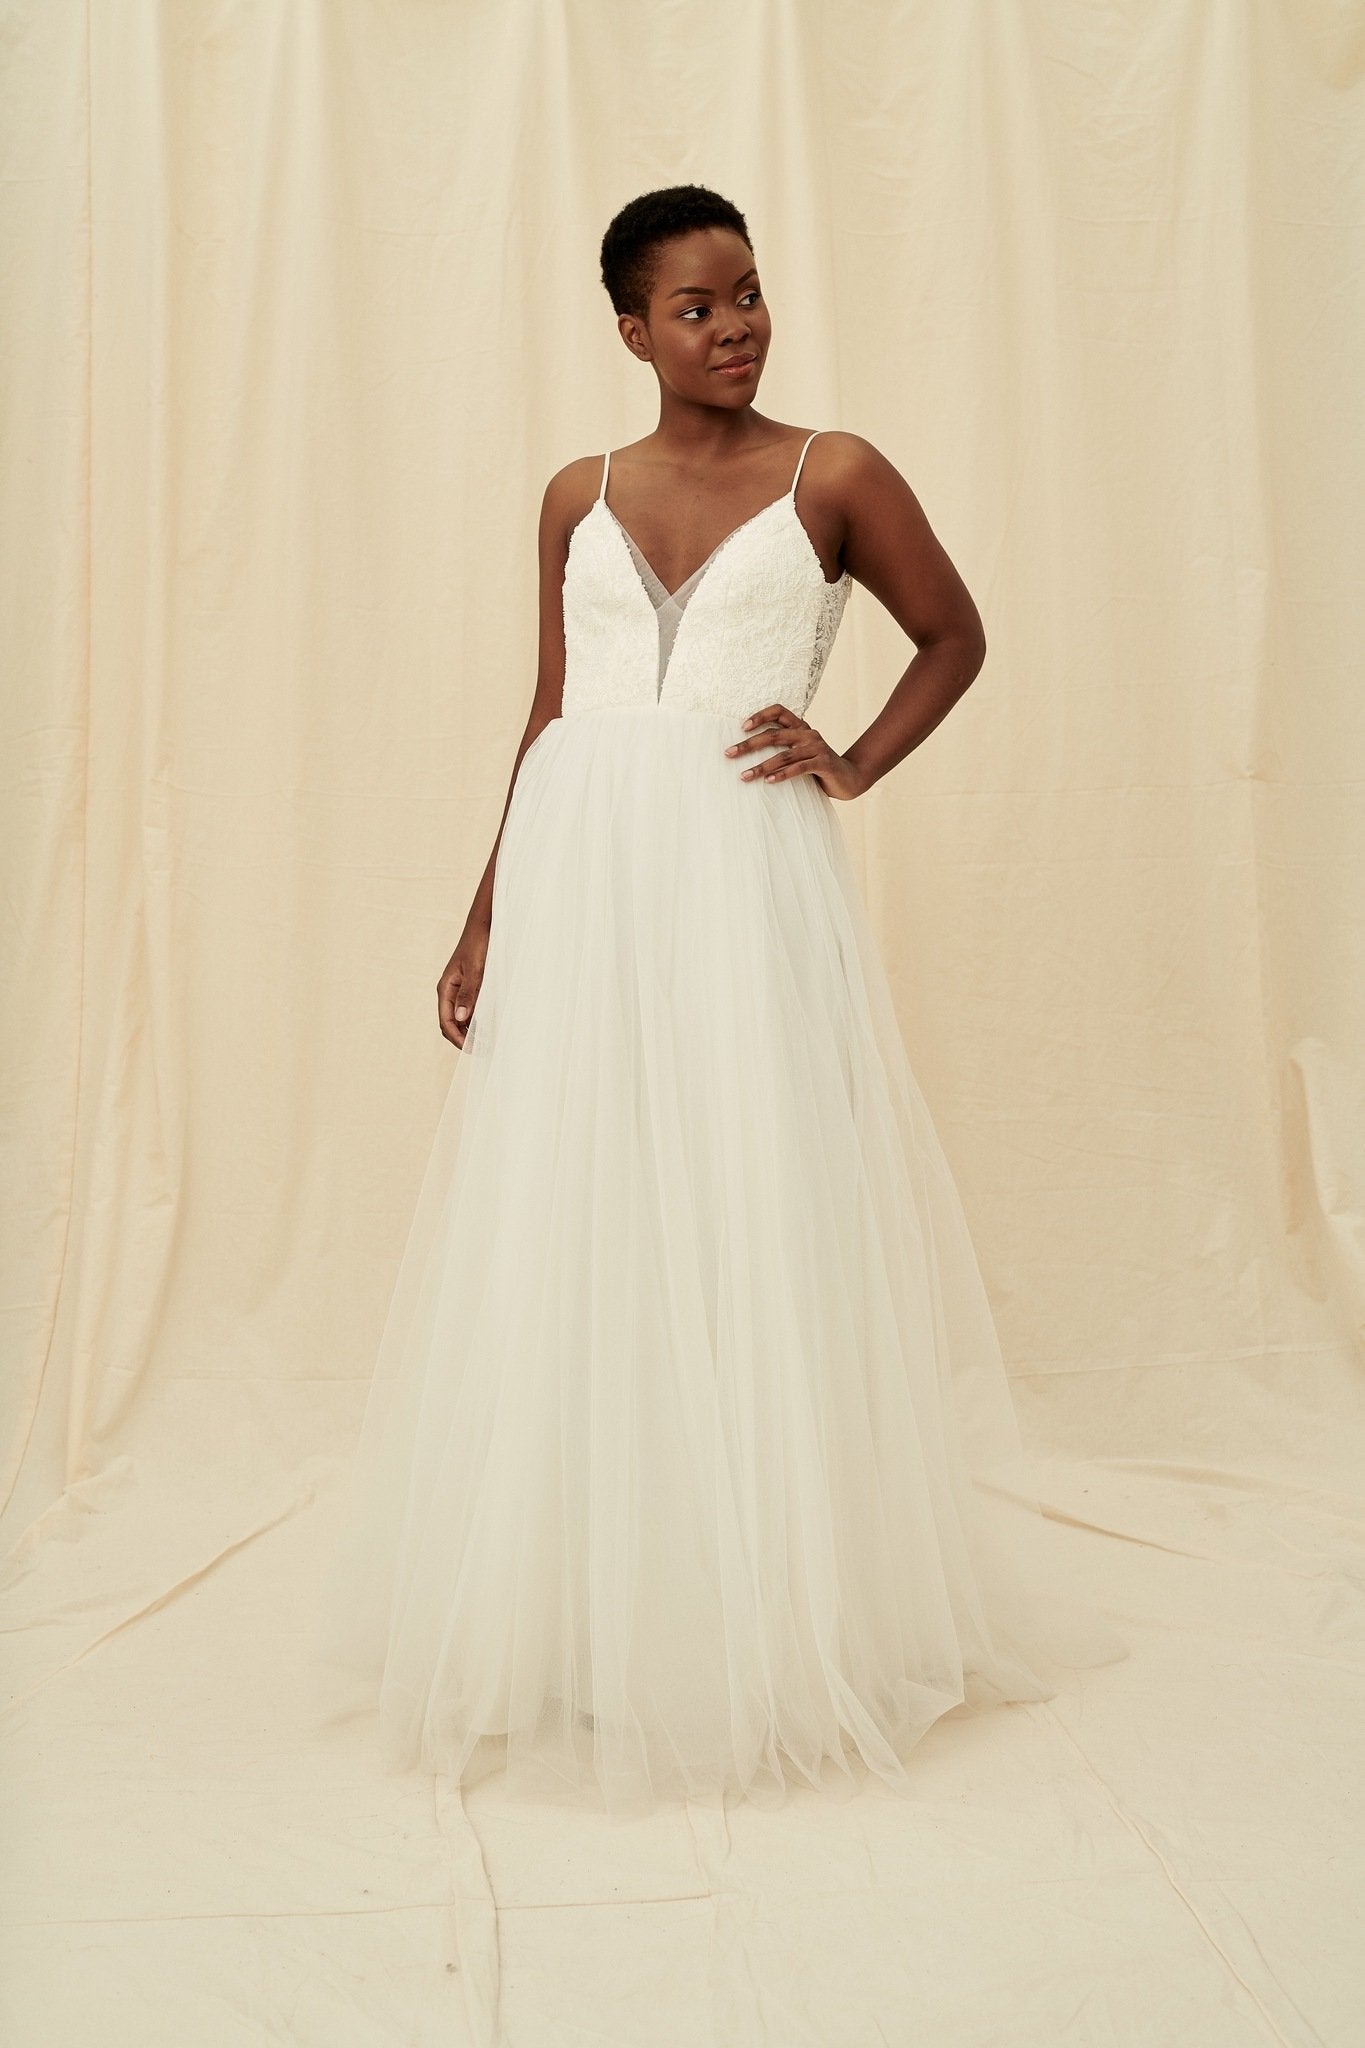 A scoop back dress with a plunging beaded bodice and a princess tulle skirt